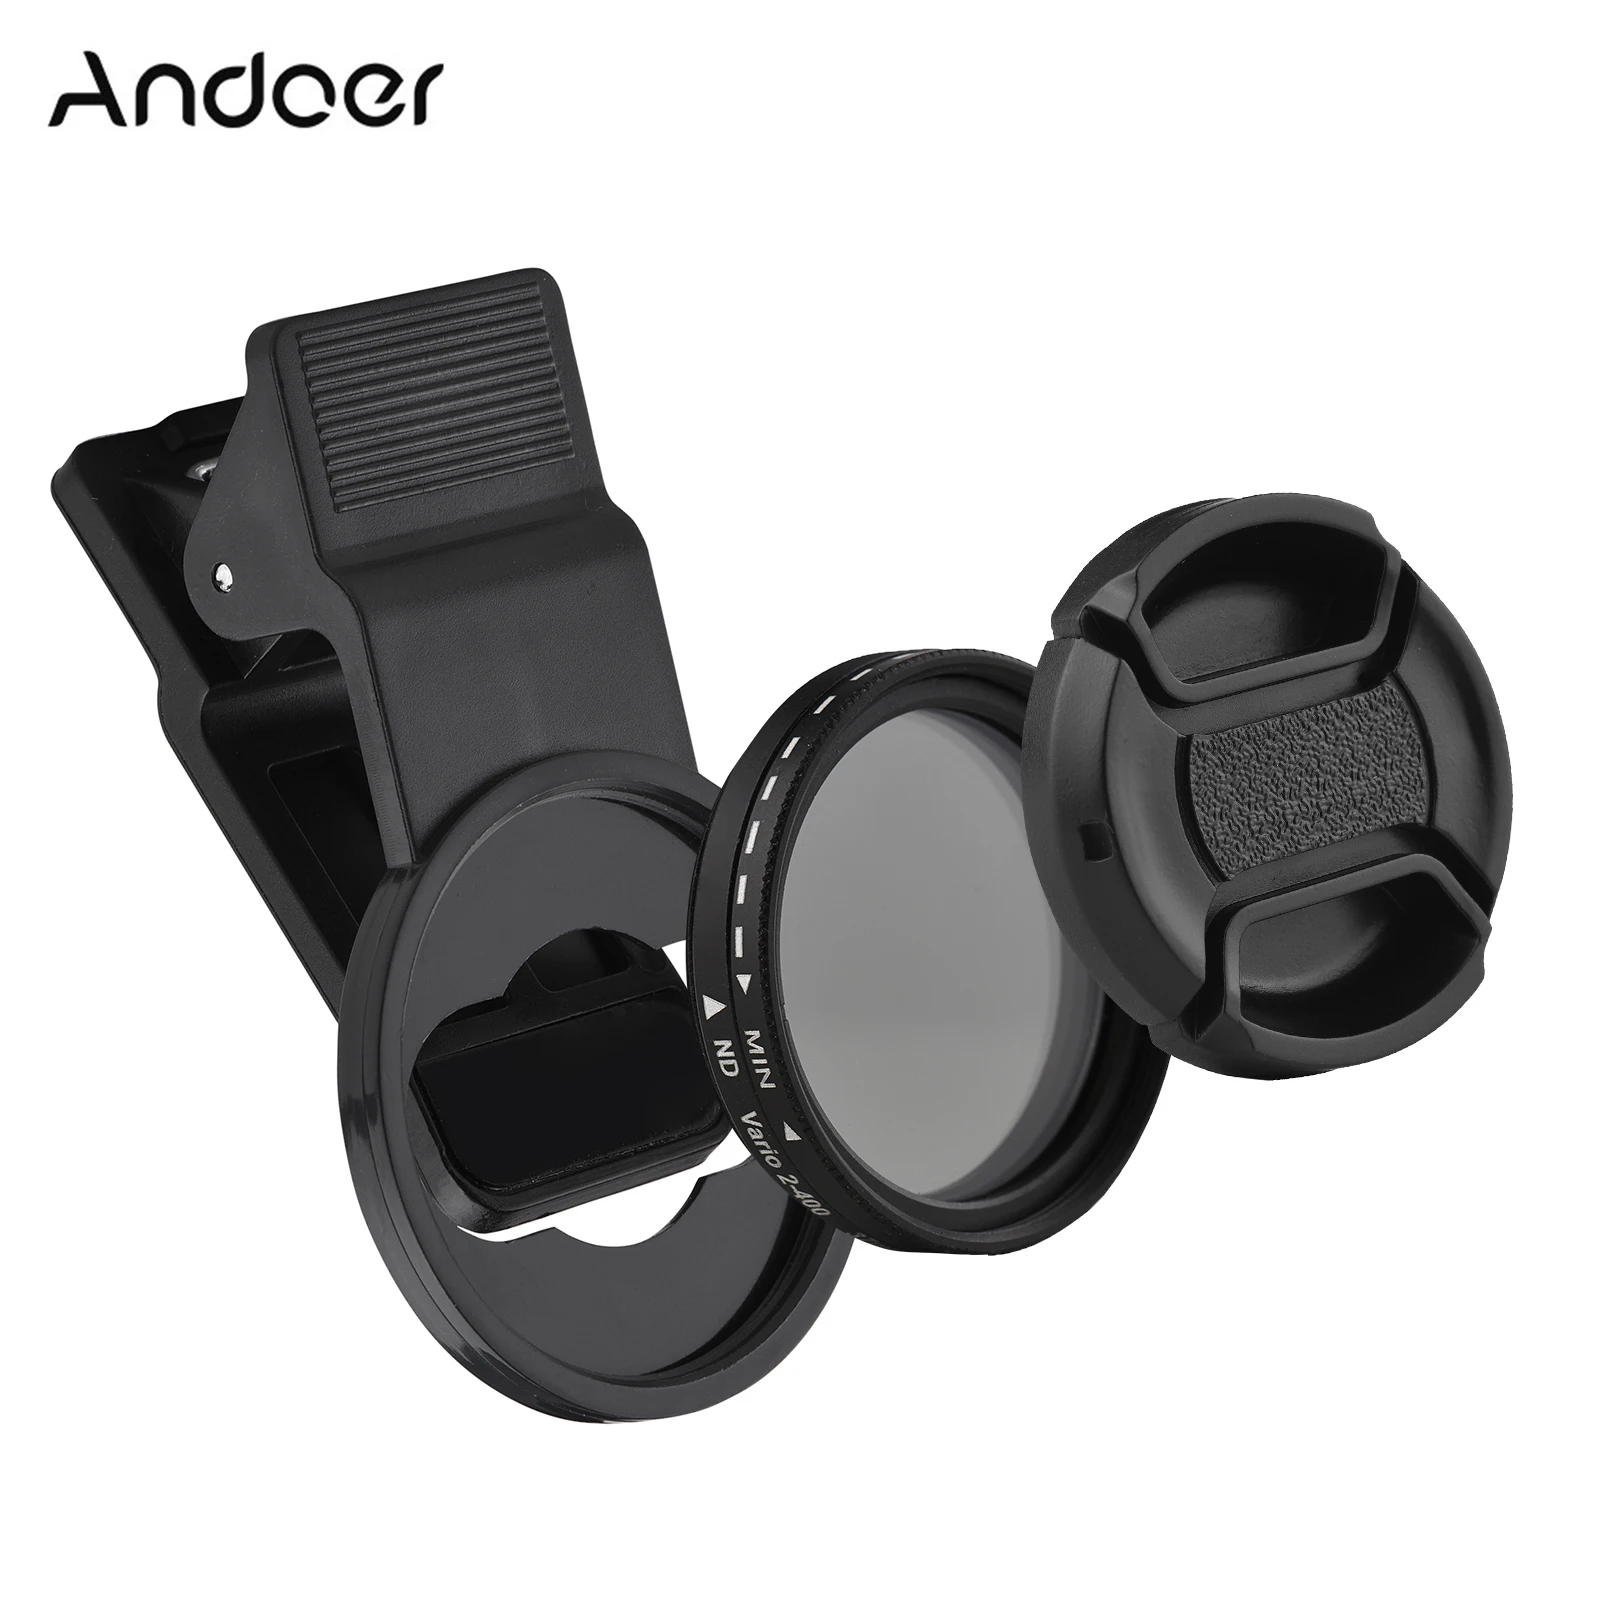 Buy Andoer 37mm Clip-on Phone Filter Lens ND2-400 Adjustable ND with Clip Protector for Smartphone Photography on